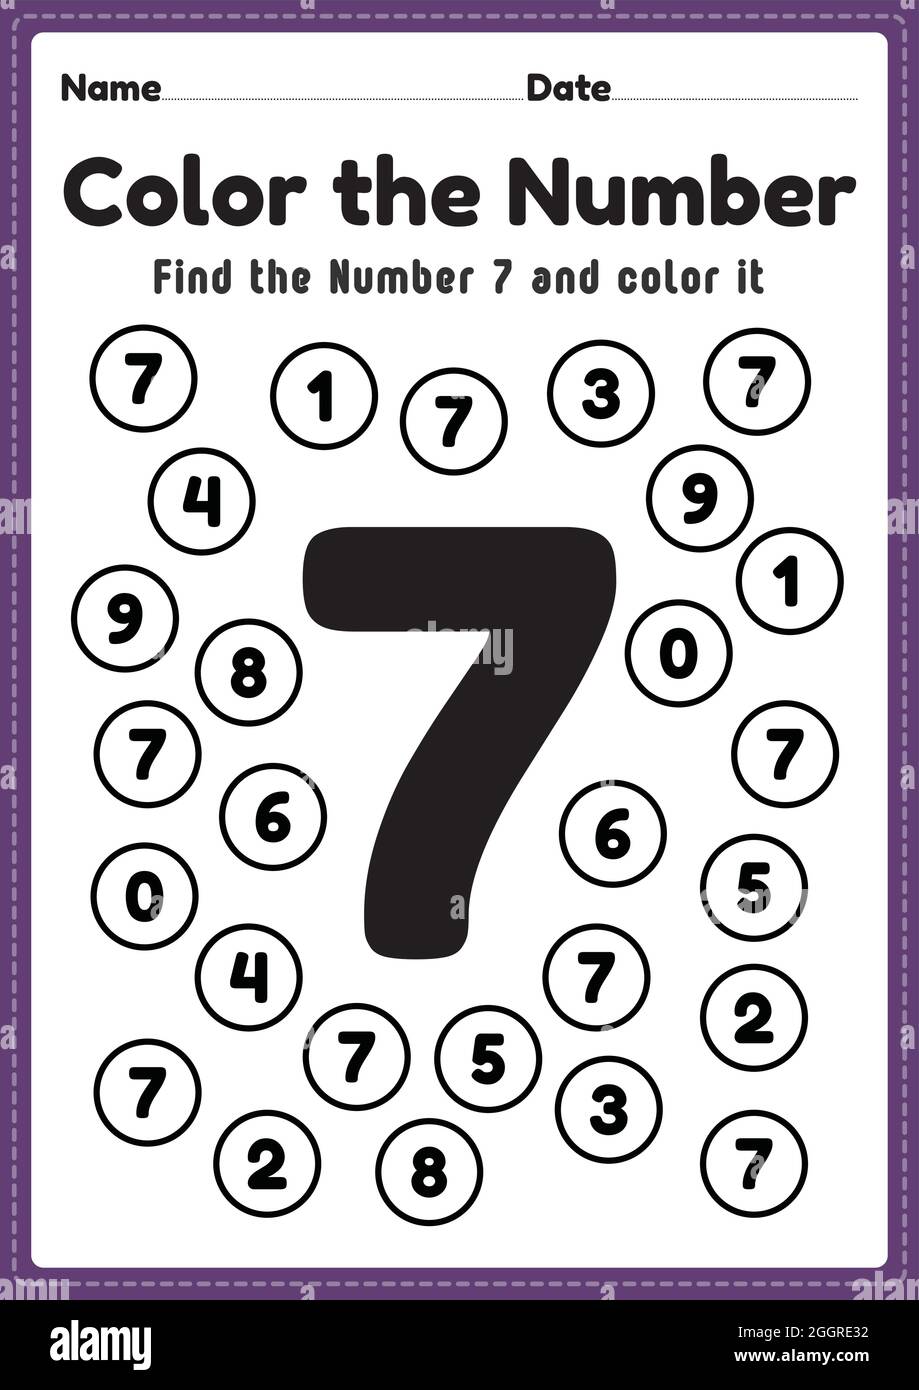 Pre k math worksheets, number 7 coloring maths activities for preschool and kindergarten kids to learn basic mathematics skills in a printable page. Stock Vector